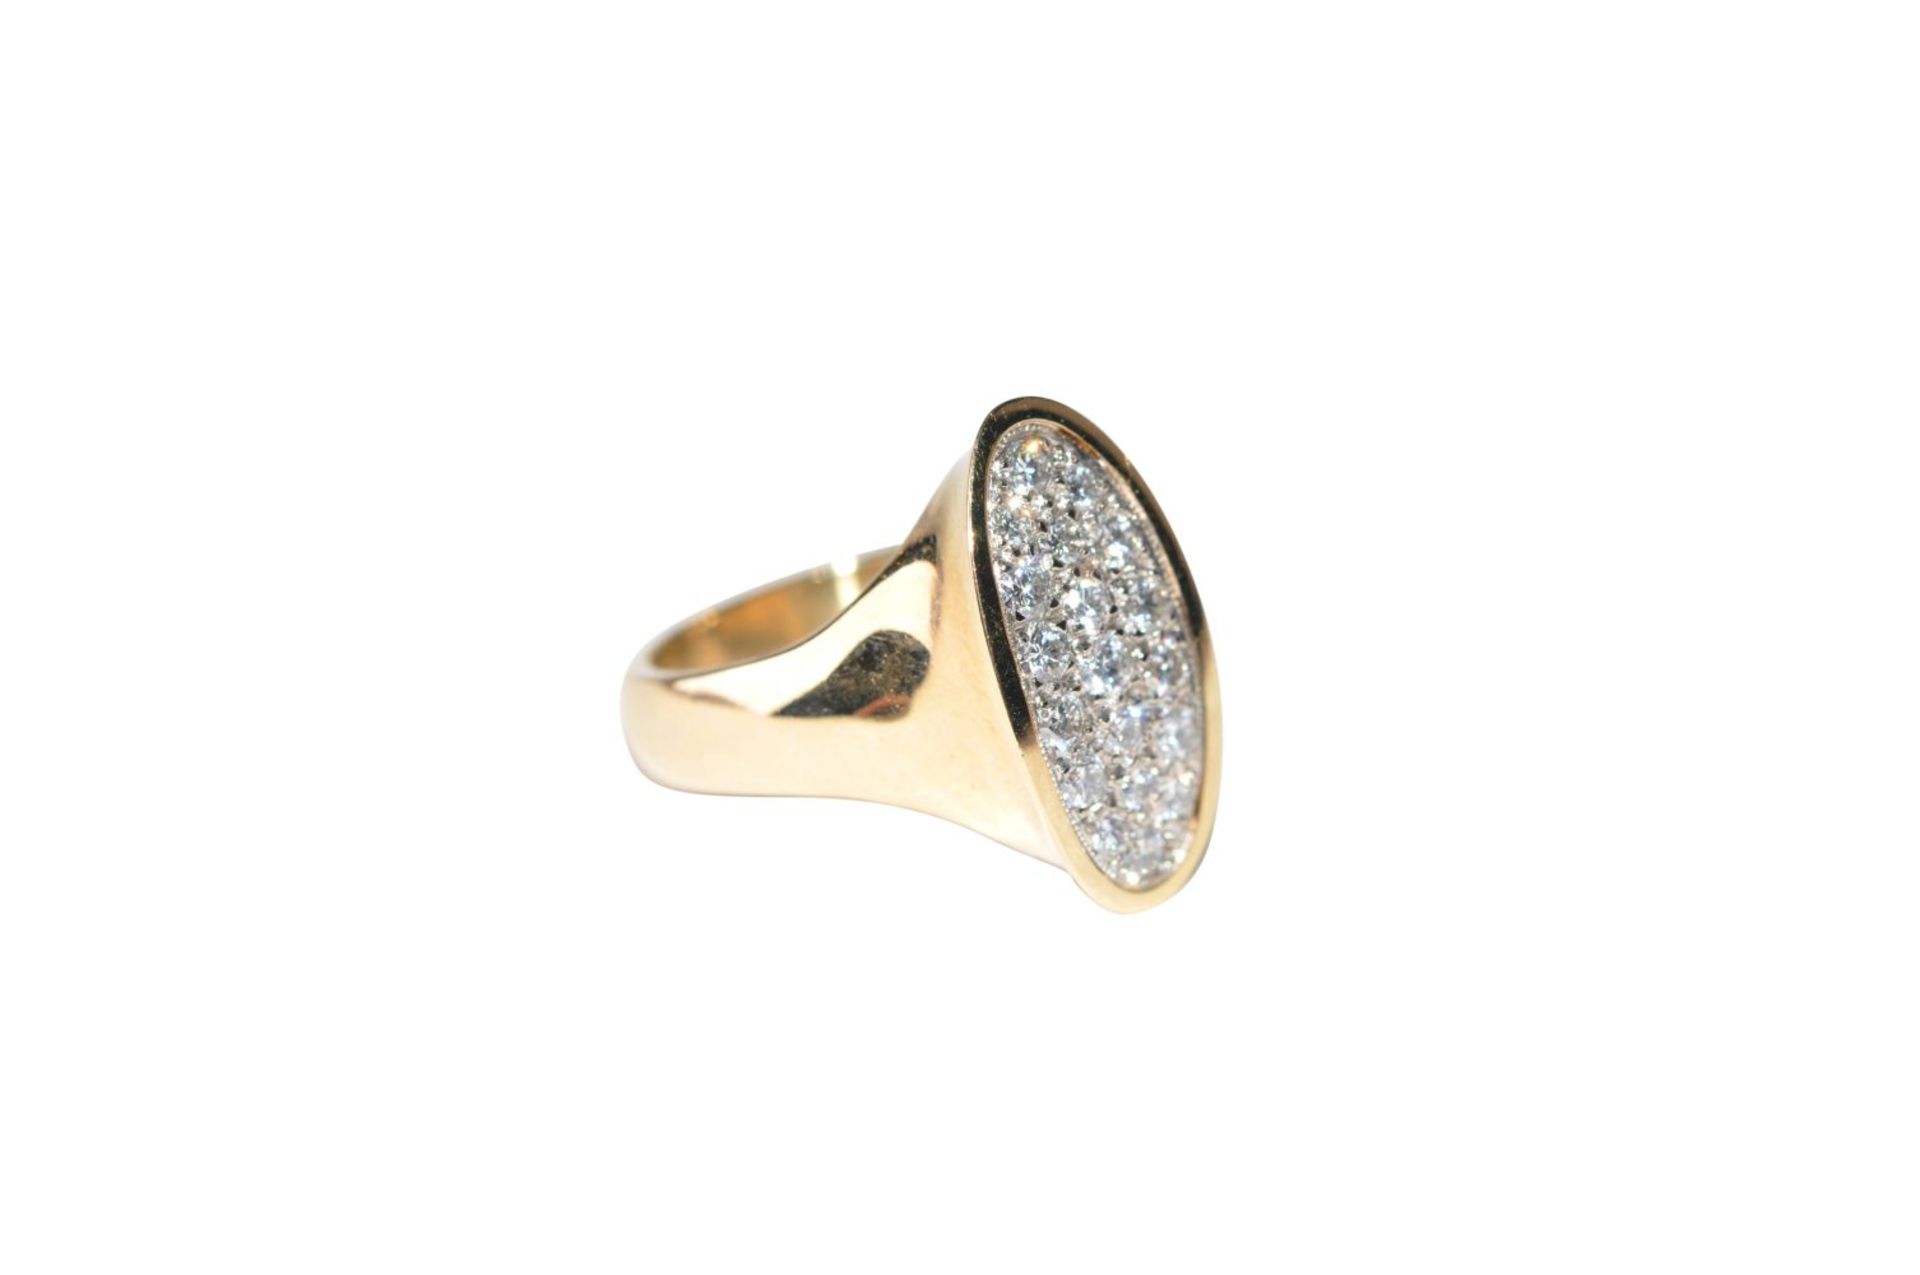 Diamond ring14Kt gold ring with diamonds, approx. 0.95ct, total weight 9.93g, size